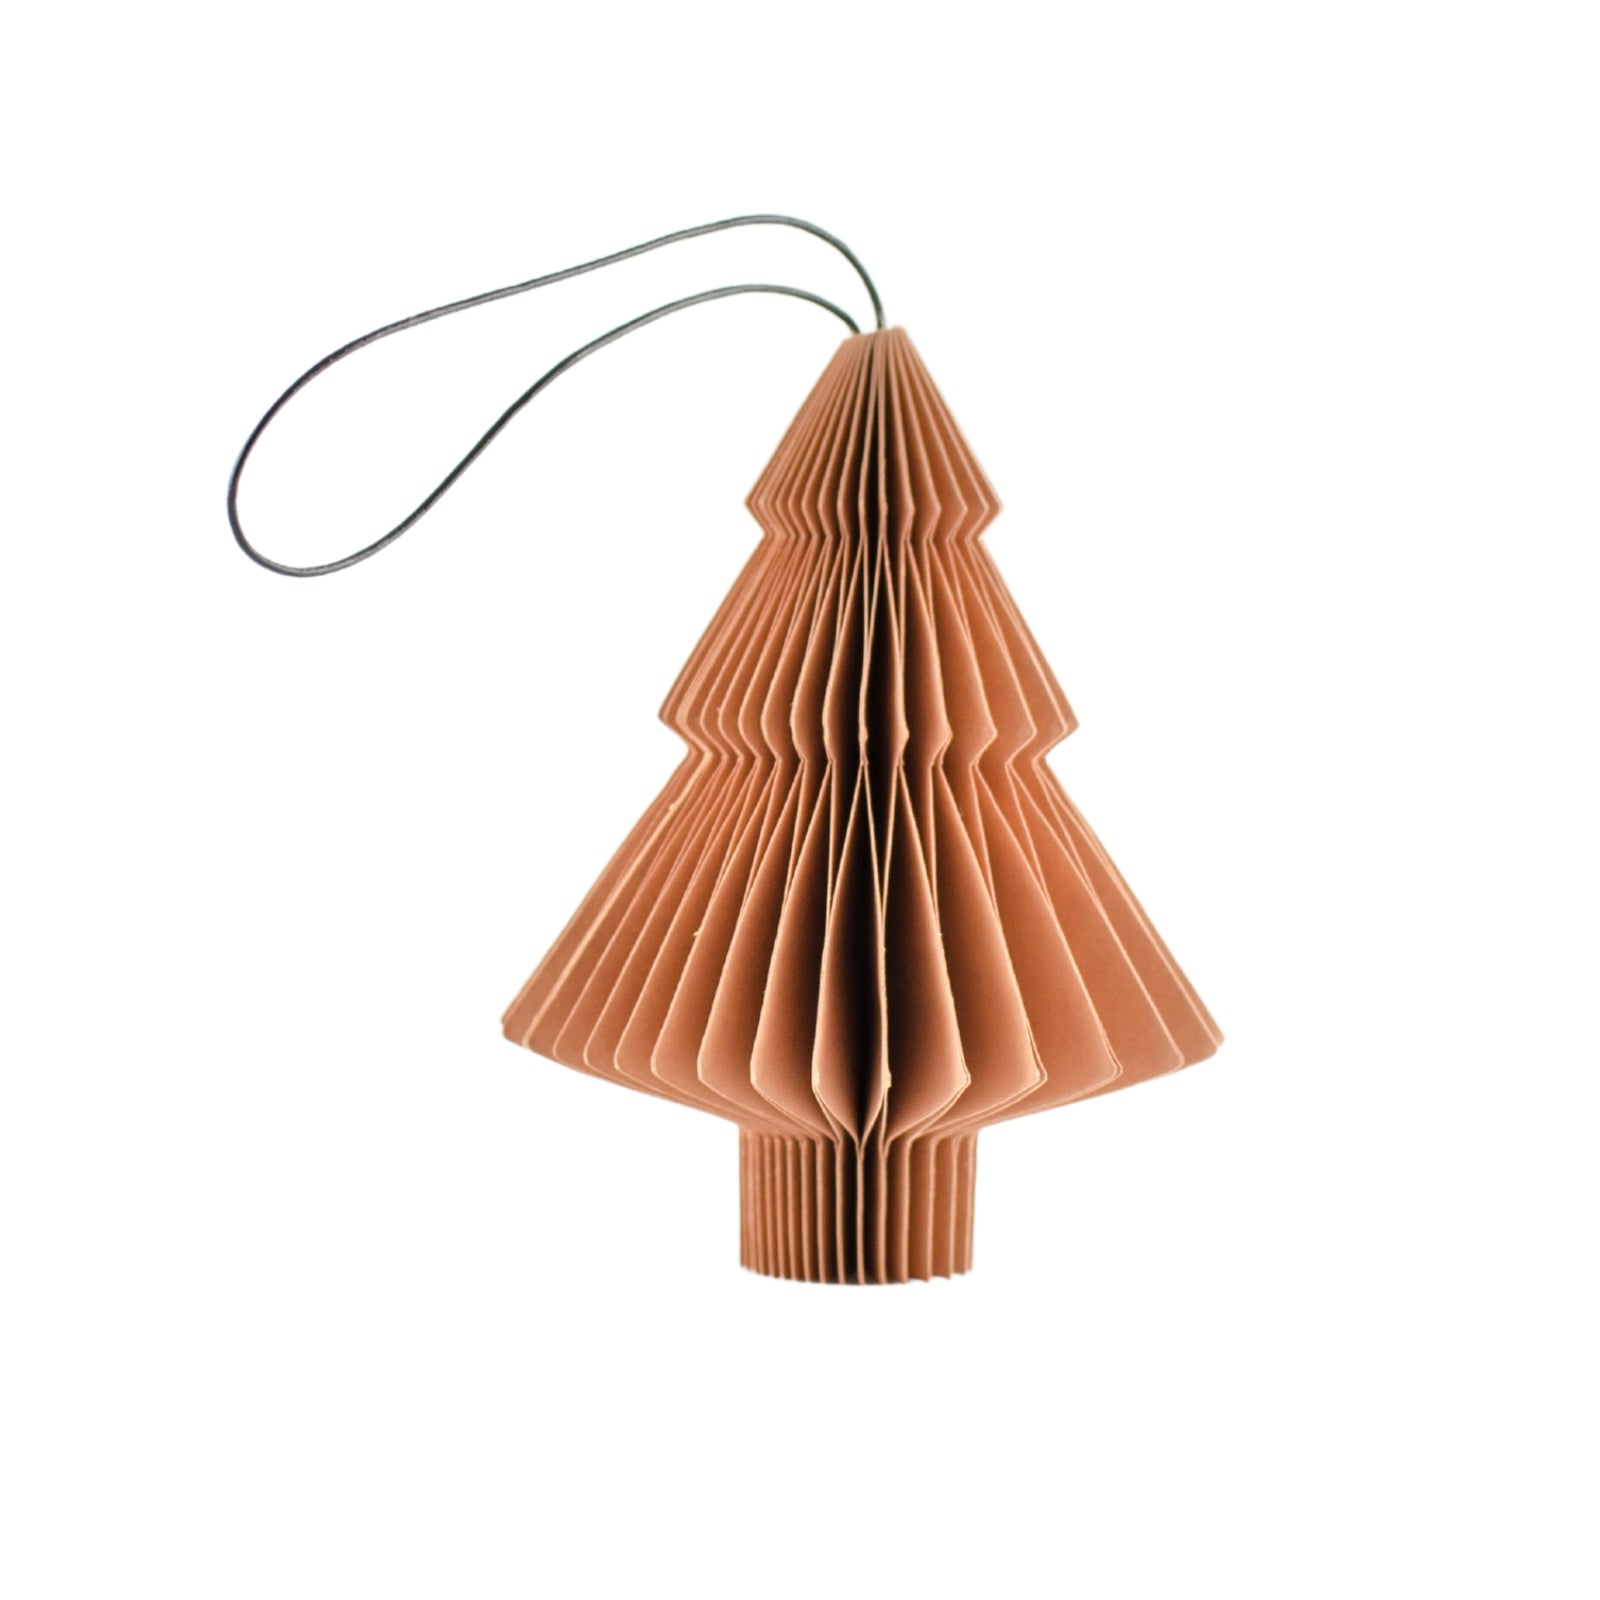 Clay Coloured Paper Christmas Ornament in the shapes of a tree against a white background.